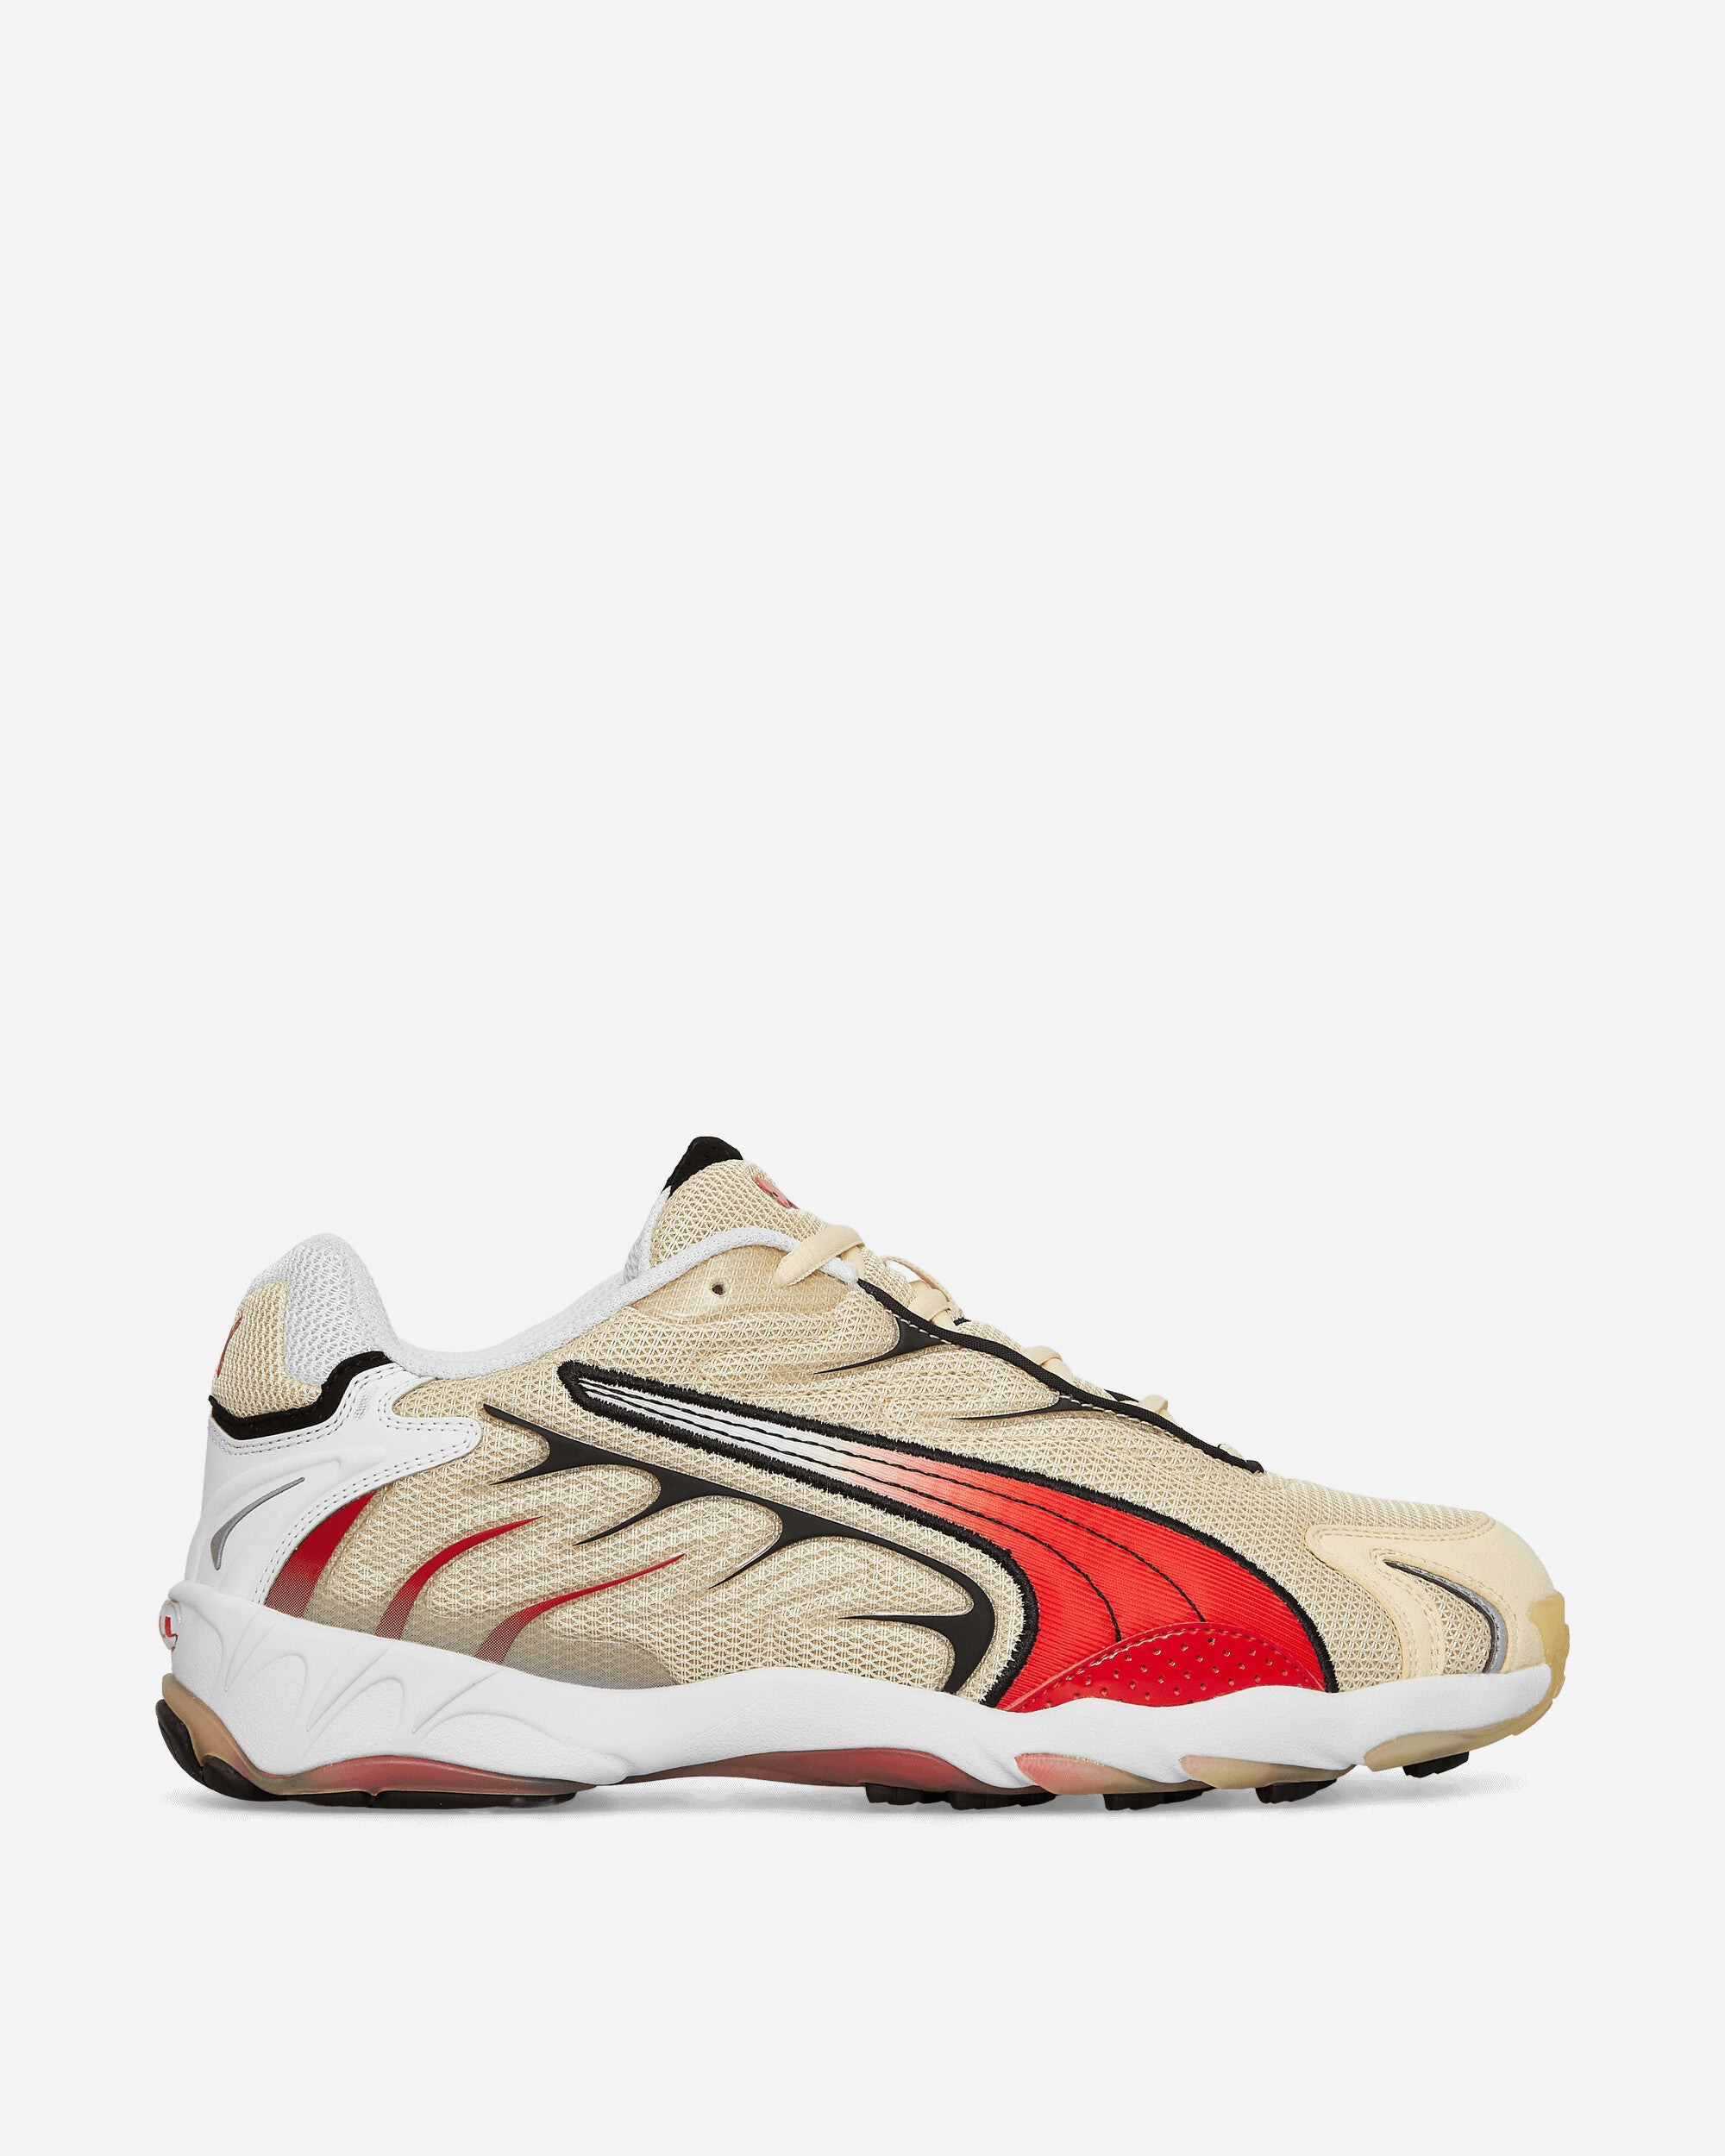 Puma A$ap Rocky Inhale Og Sneakers Summer Melon / High Risk Red In Neutral